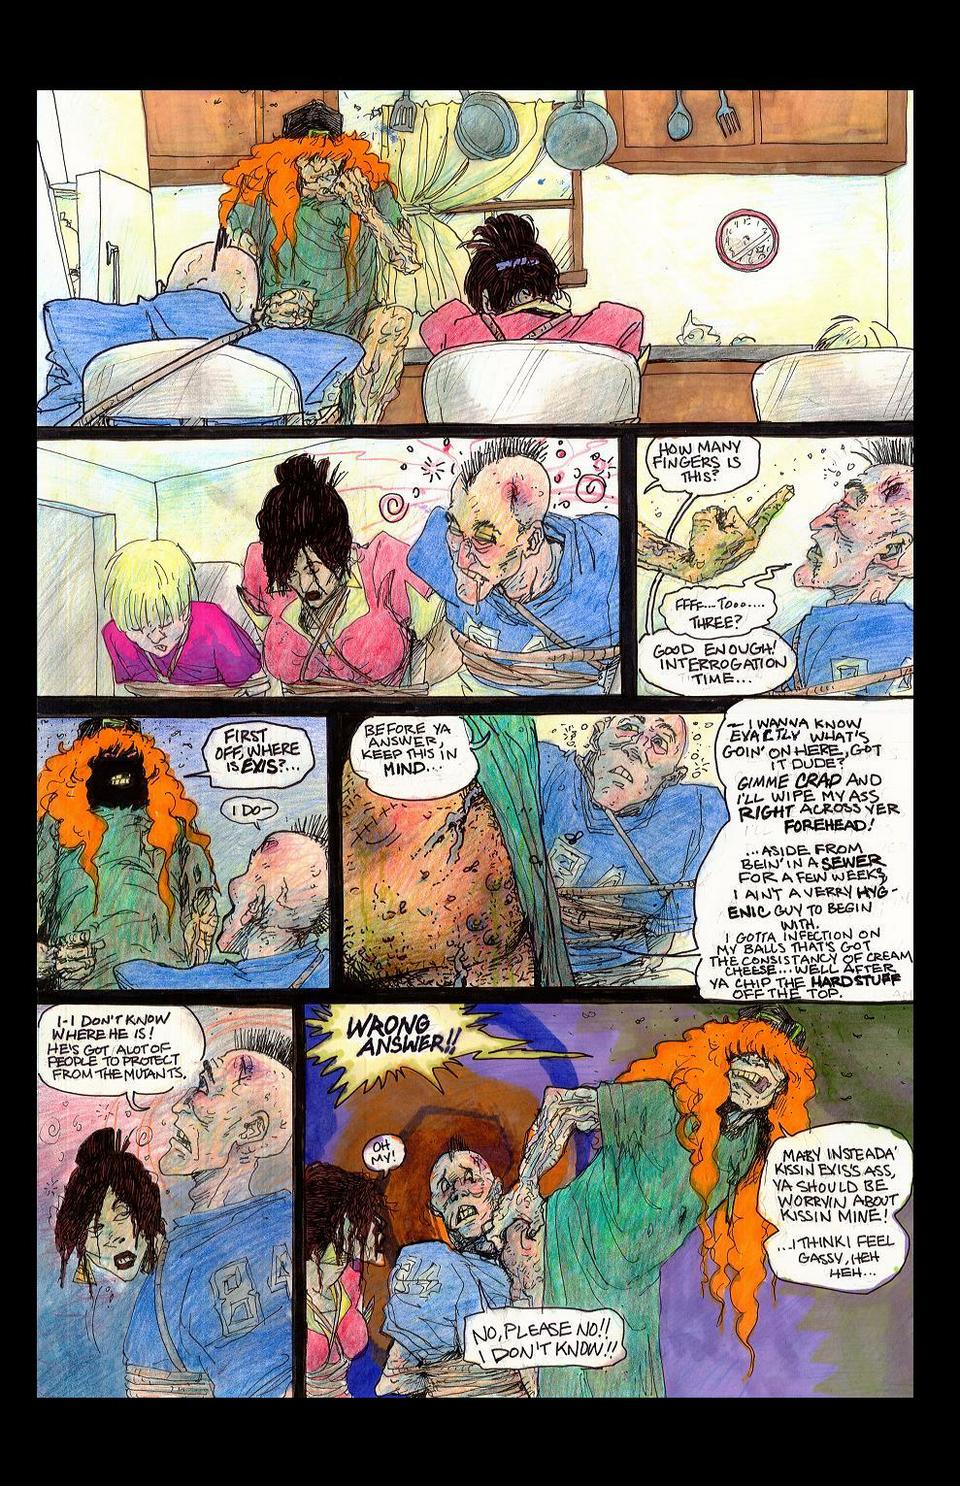 PUTRID MEAT PAGE 129